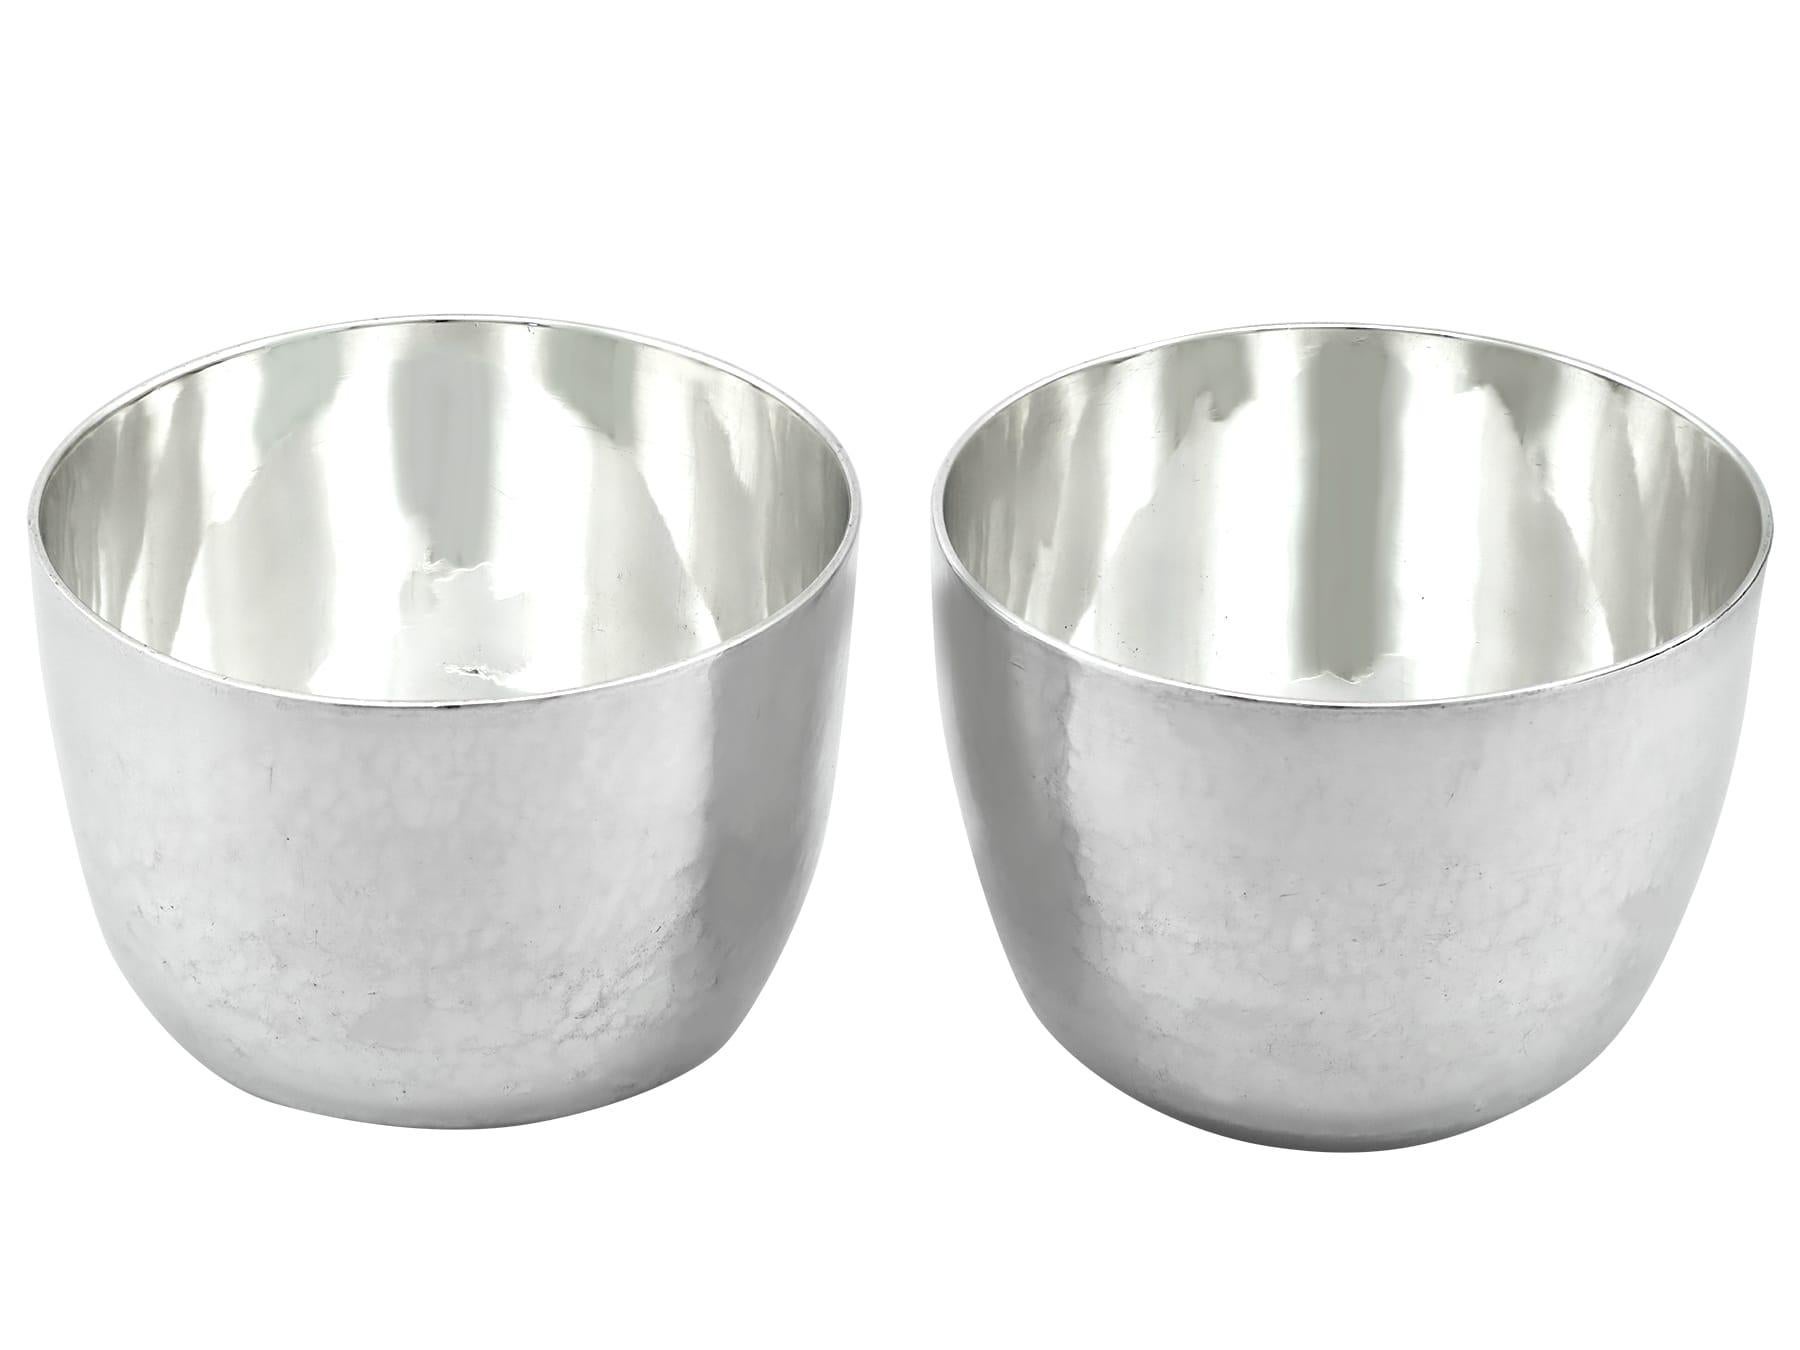 An exceptional, fine and impressive pair of contemporary Scottish Britannia standard silver tumbler cups by Peter Maurice Castle-Smith; an addition to our ornamental silverware collection

These exceptional contemporary Britannia* silver tumbler